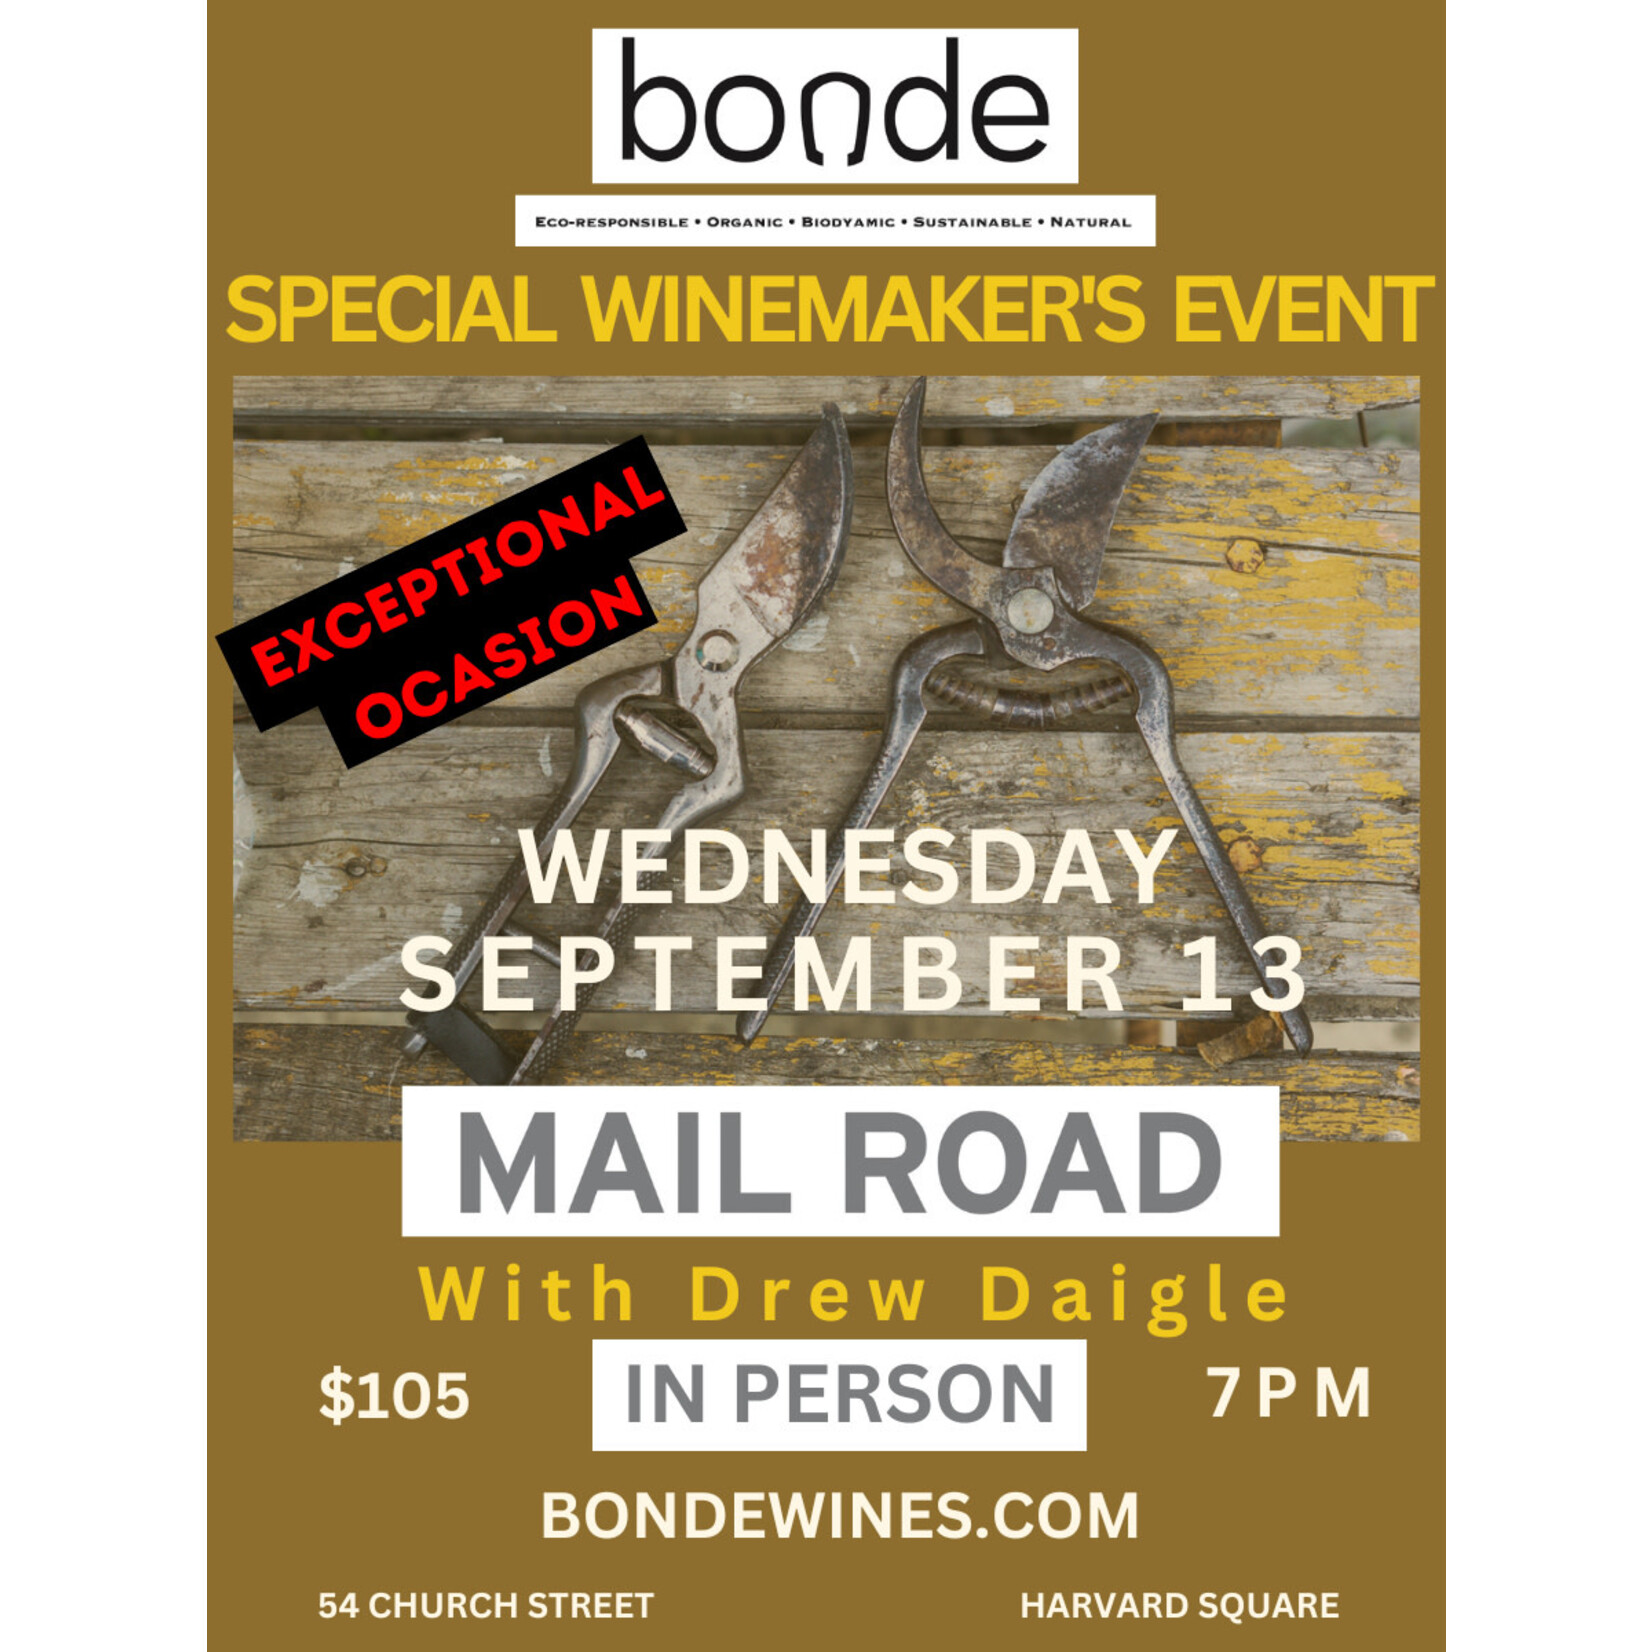 Mail Road - Wine Tasting & Class - Wednesday September 13, 7PM